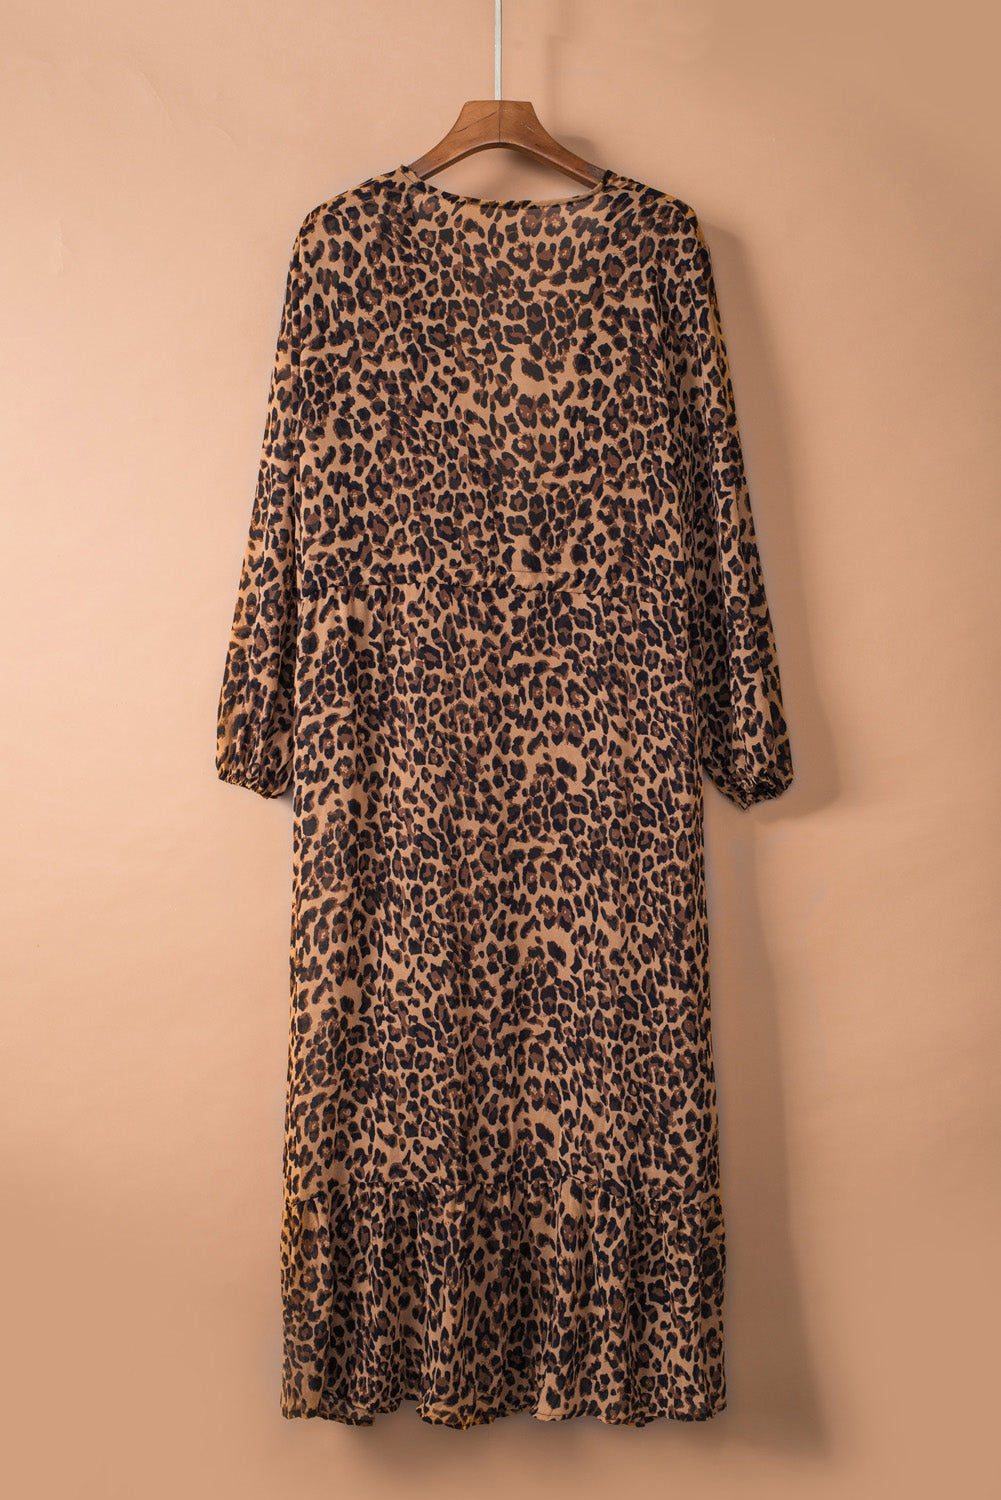 Sunset Vacation  Leopard Open Front Long Sleeve Cover Up  Sunset and Swim   